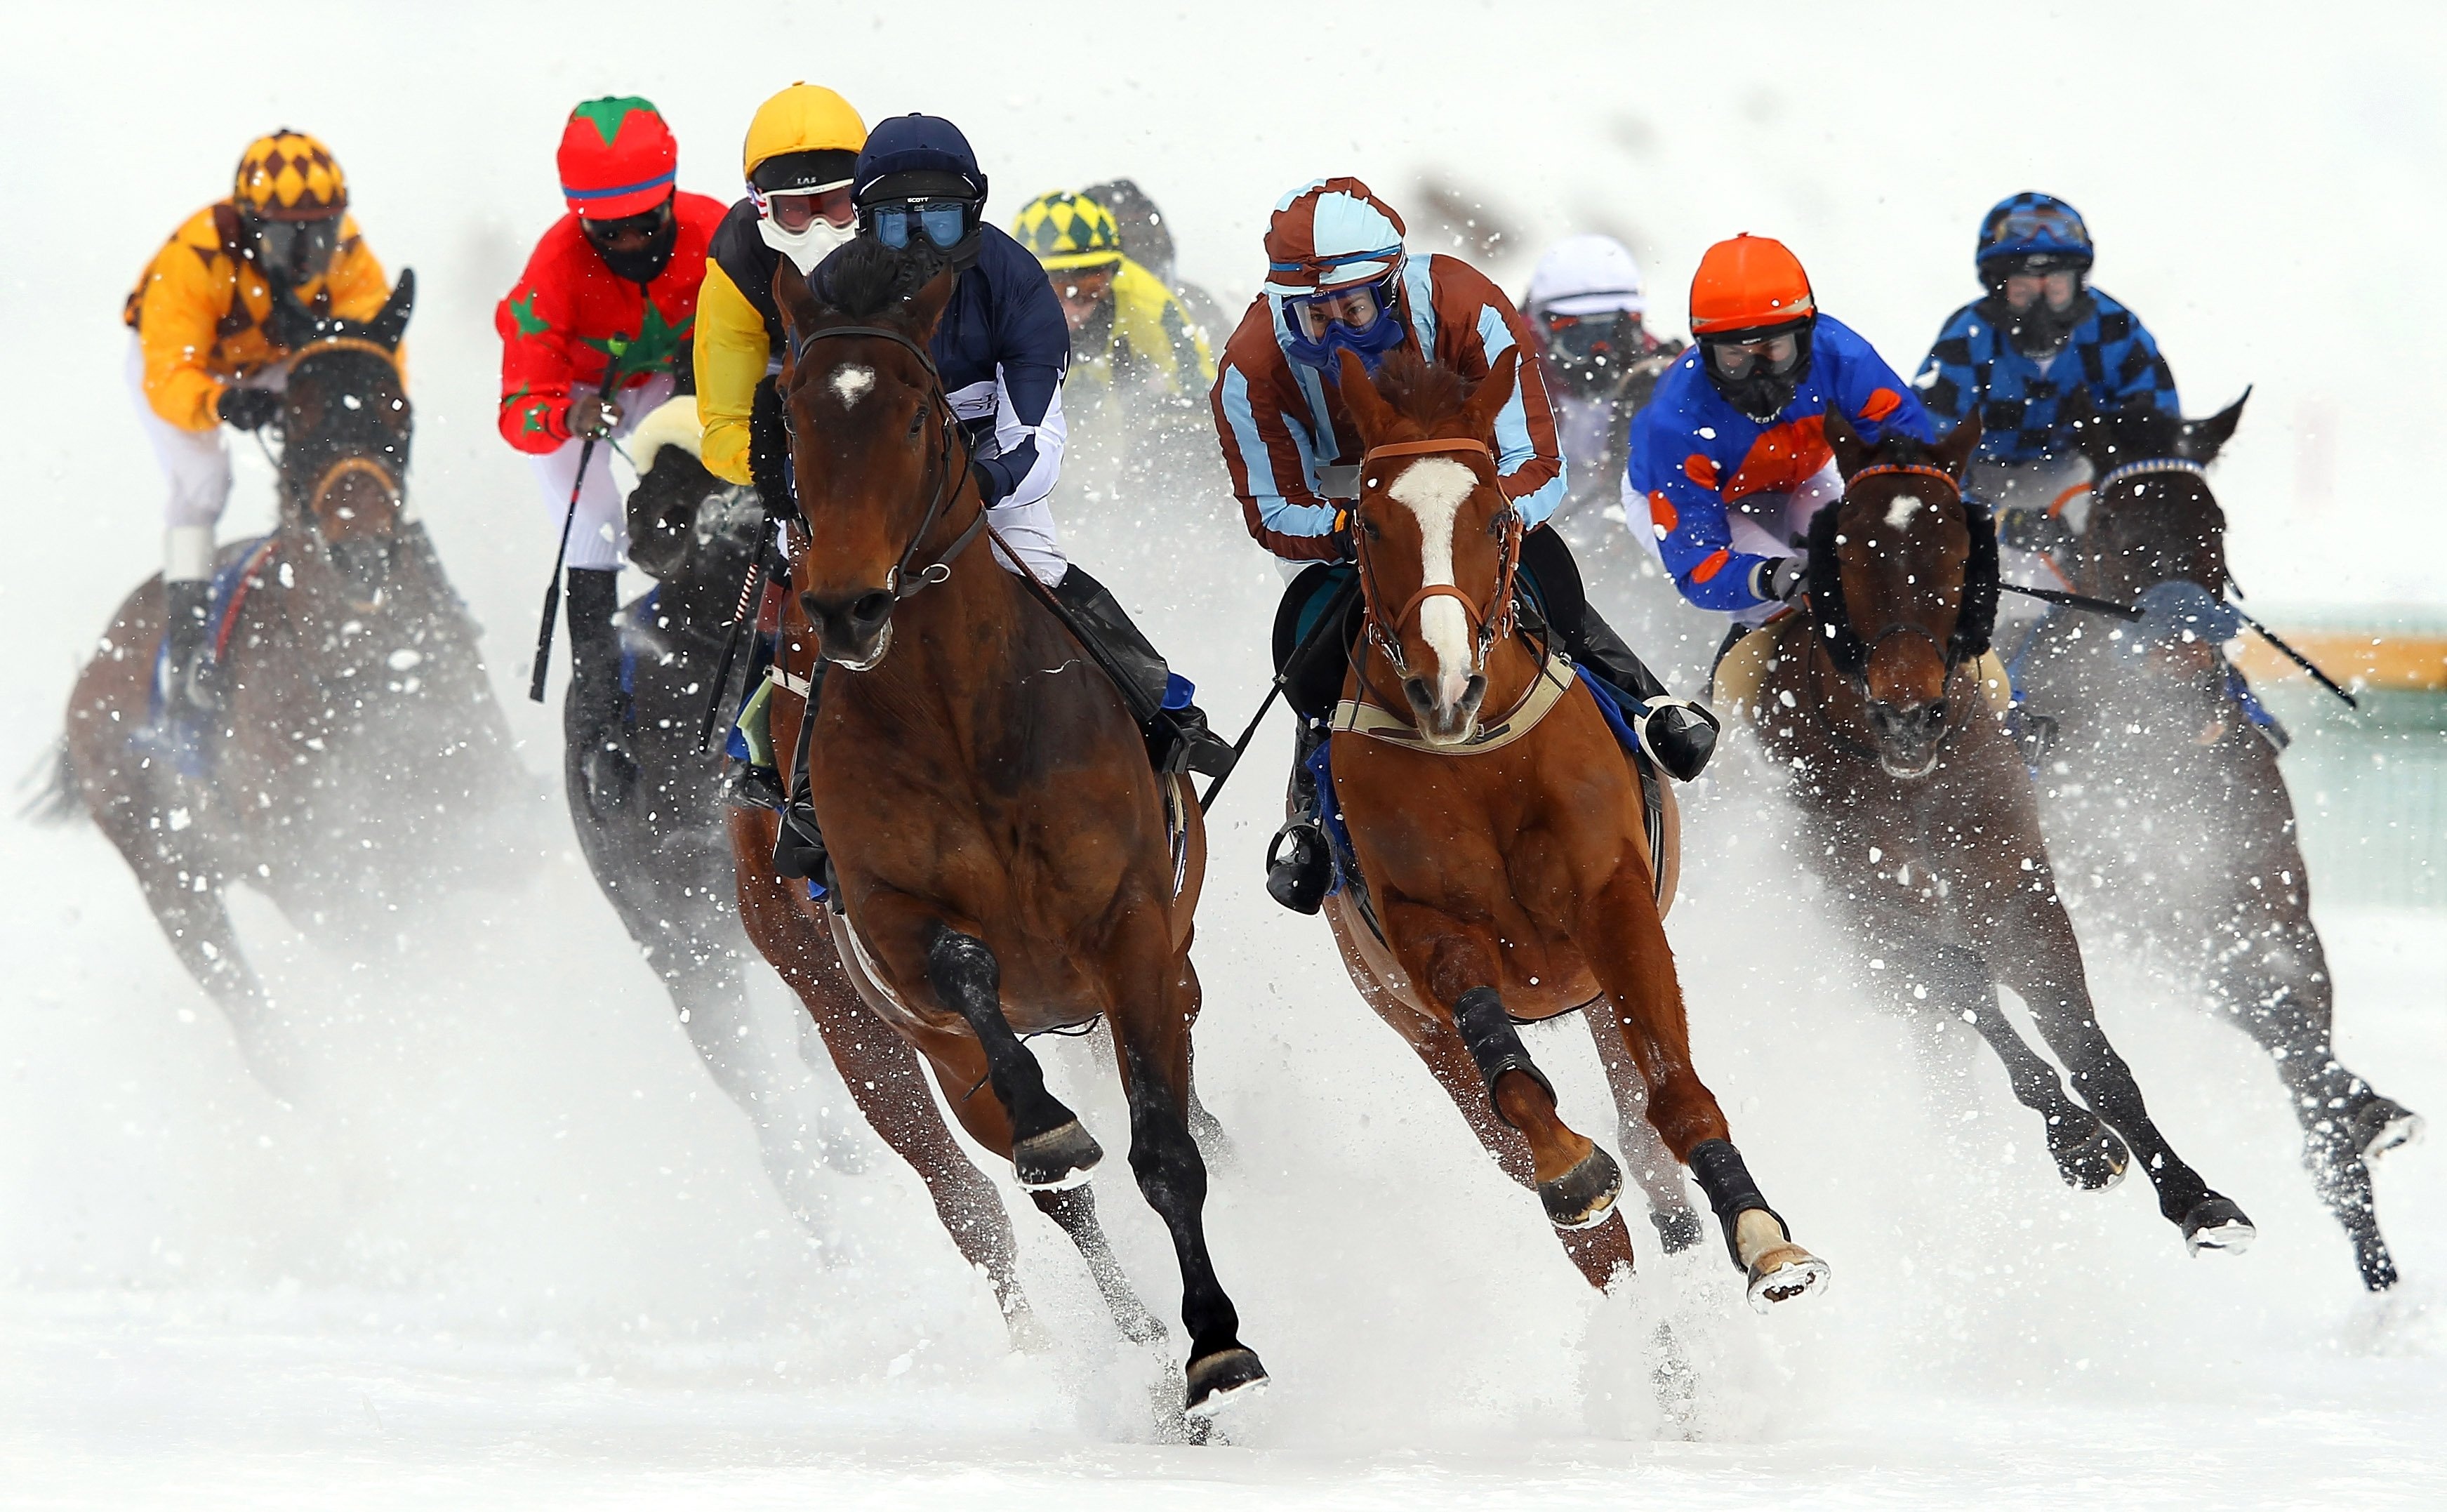 Equestrian Sports: Winter flat racing, The most common form of horse racing seen worldwide. 3490x2160 HD Background.